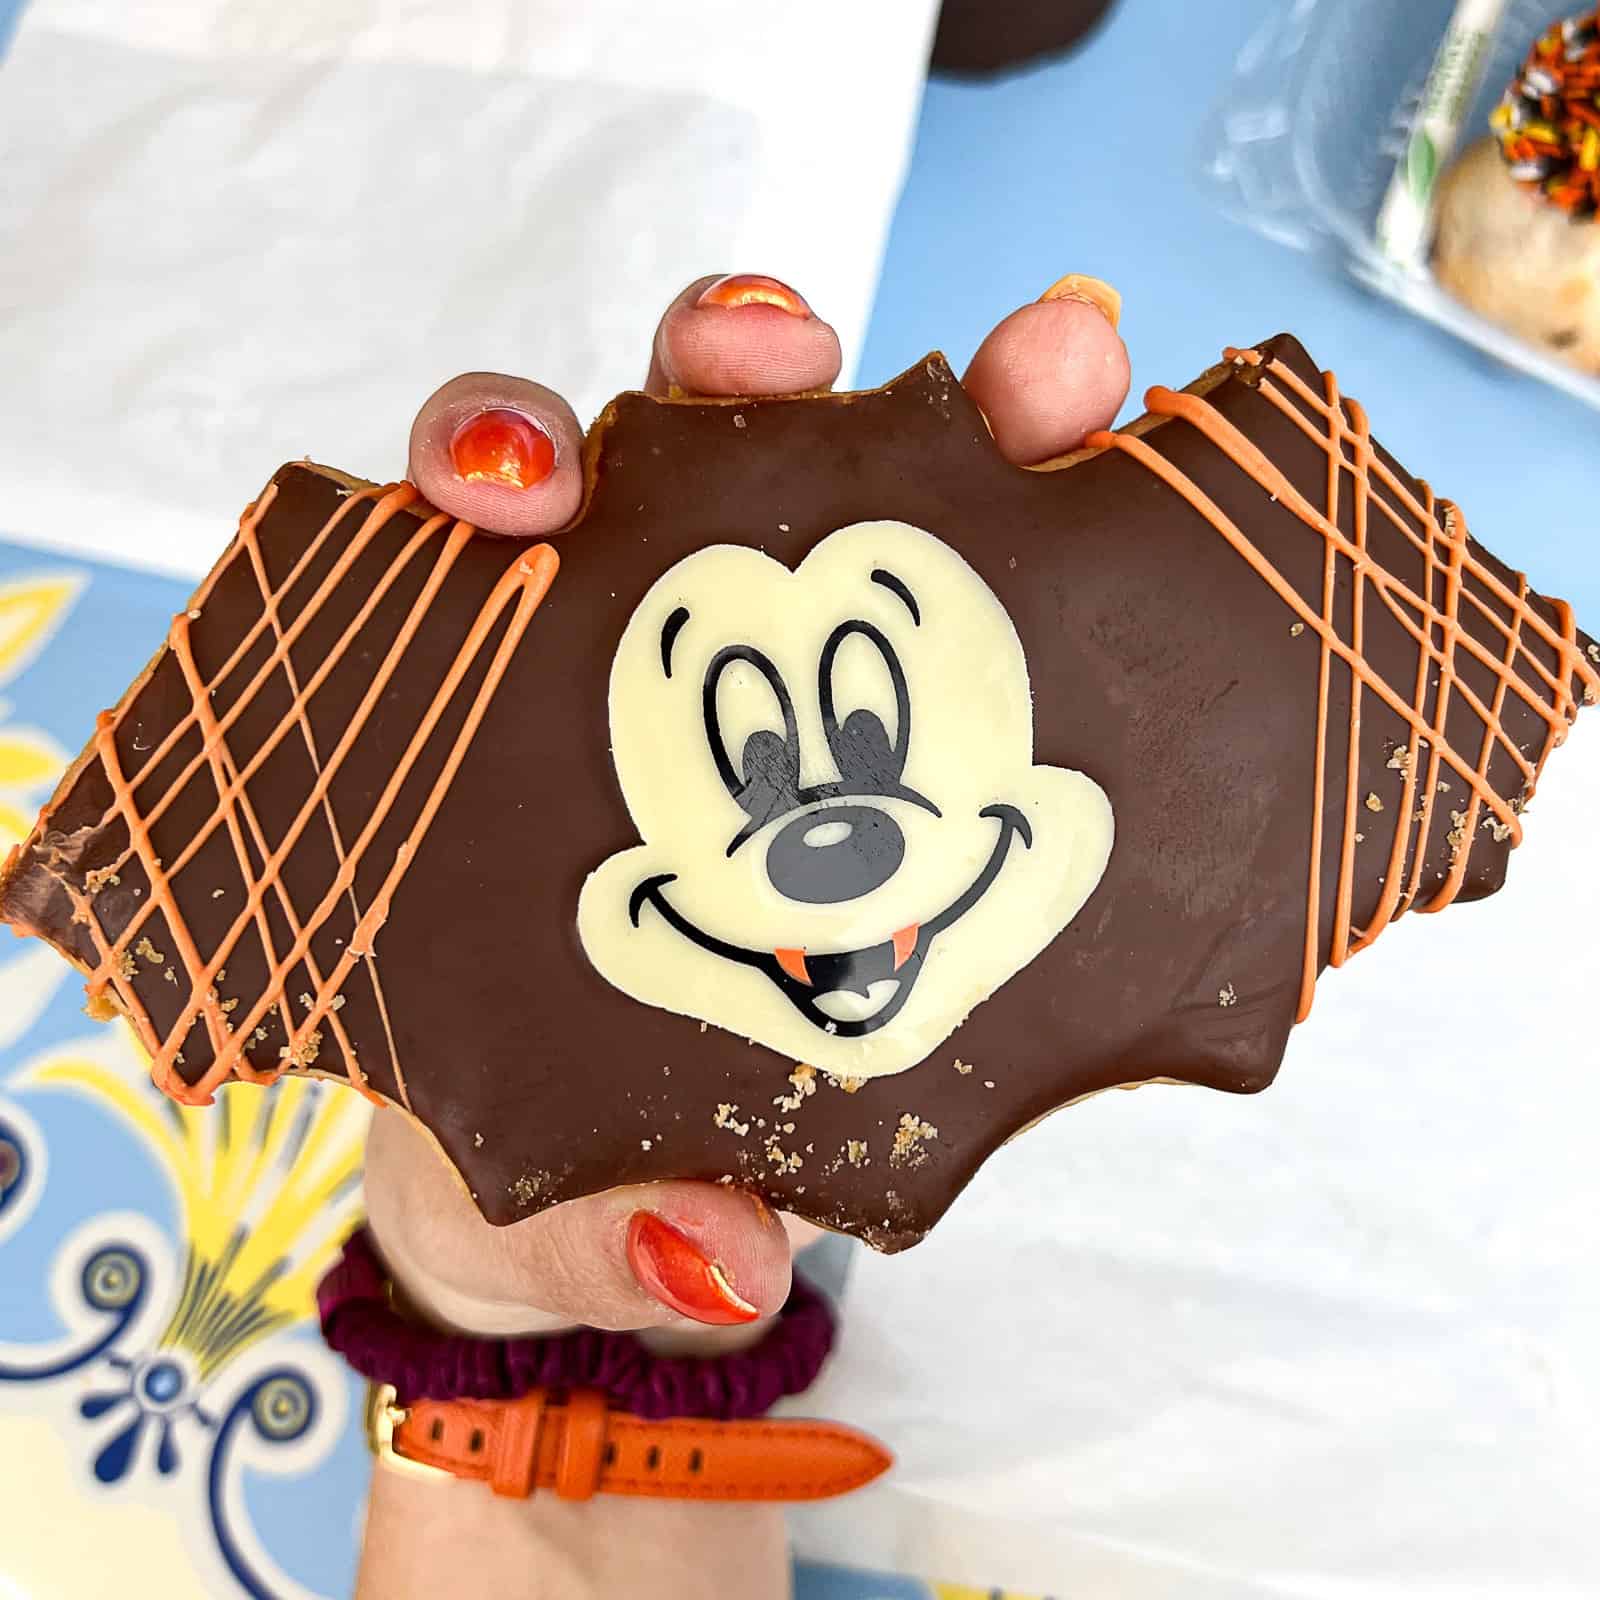 Mickey Shaped Bat Cookie for Halloween at Disneyland